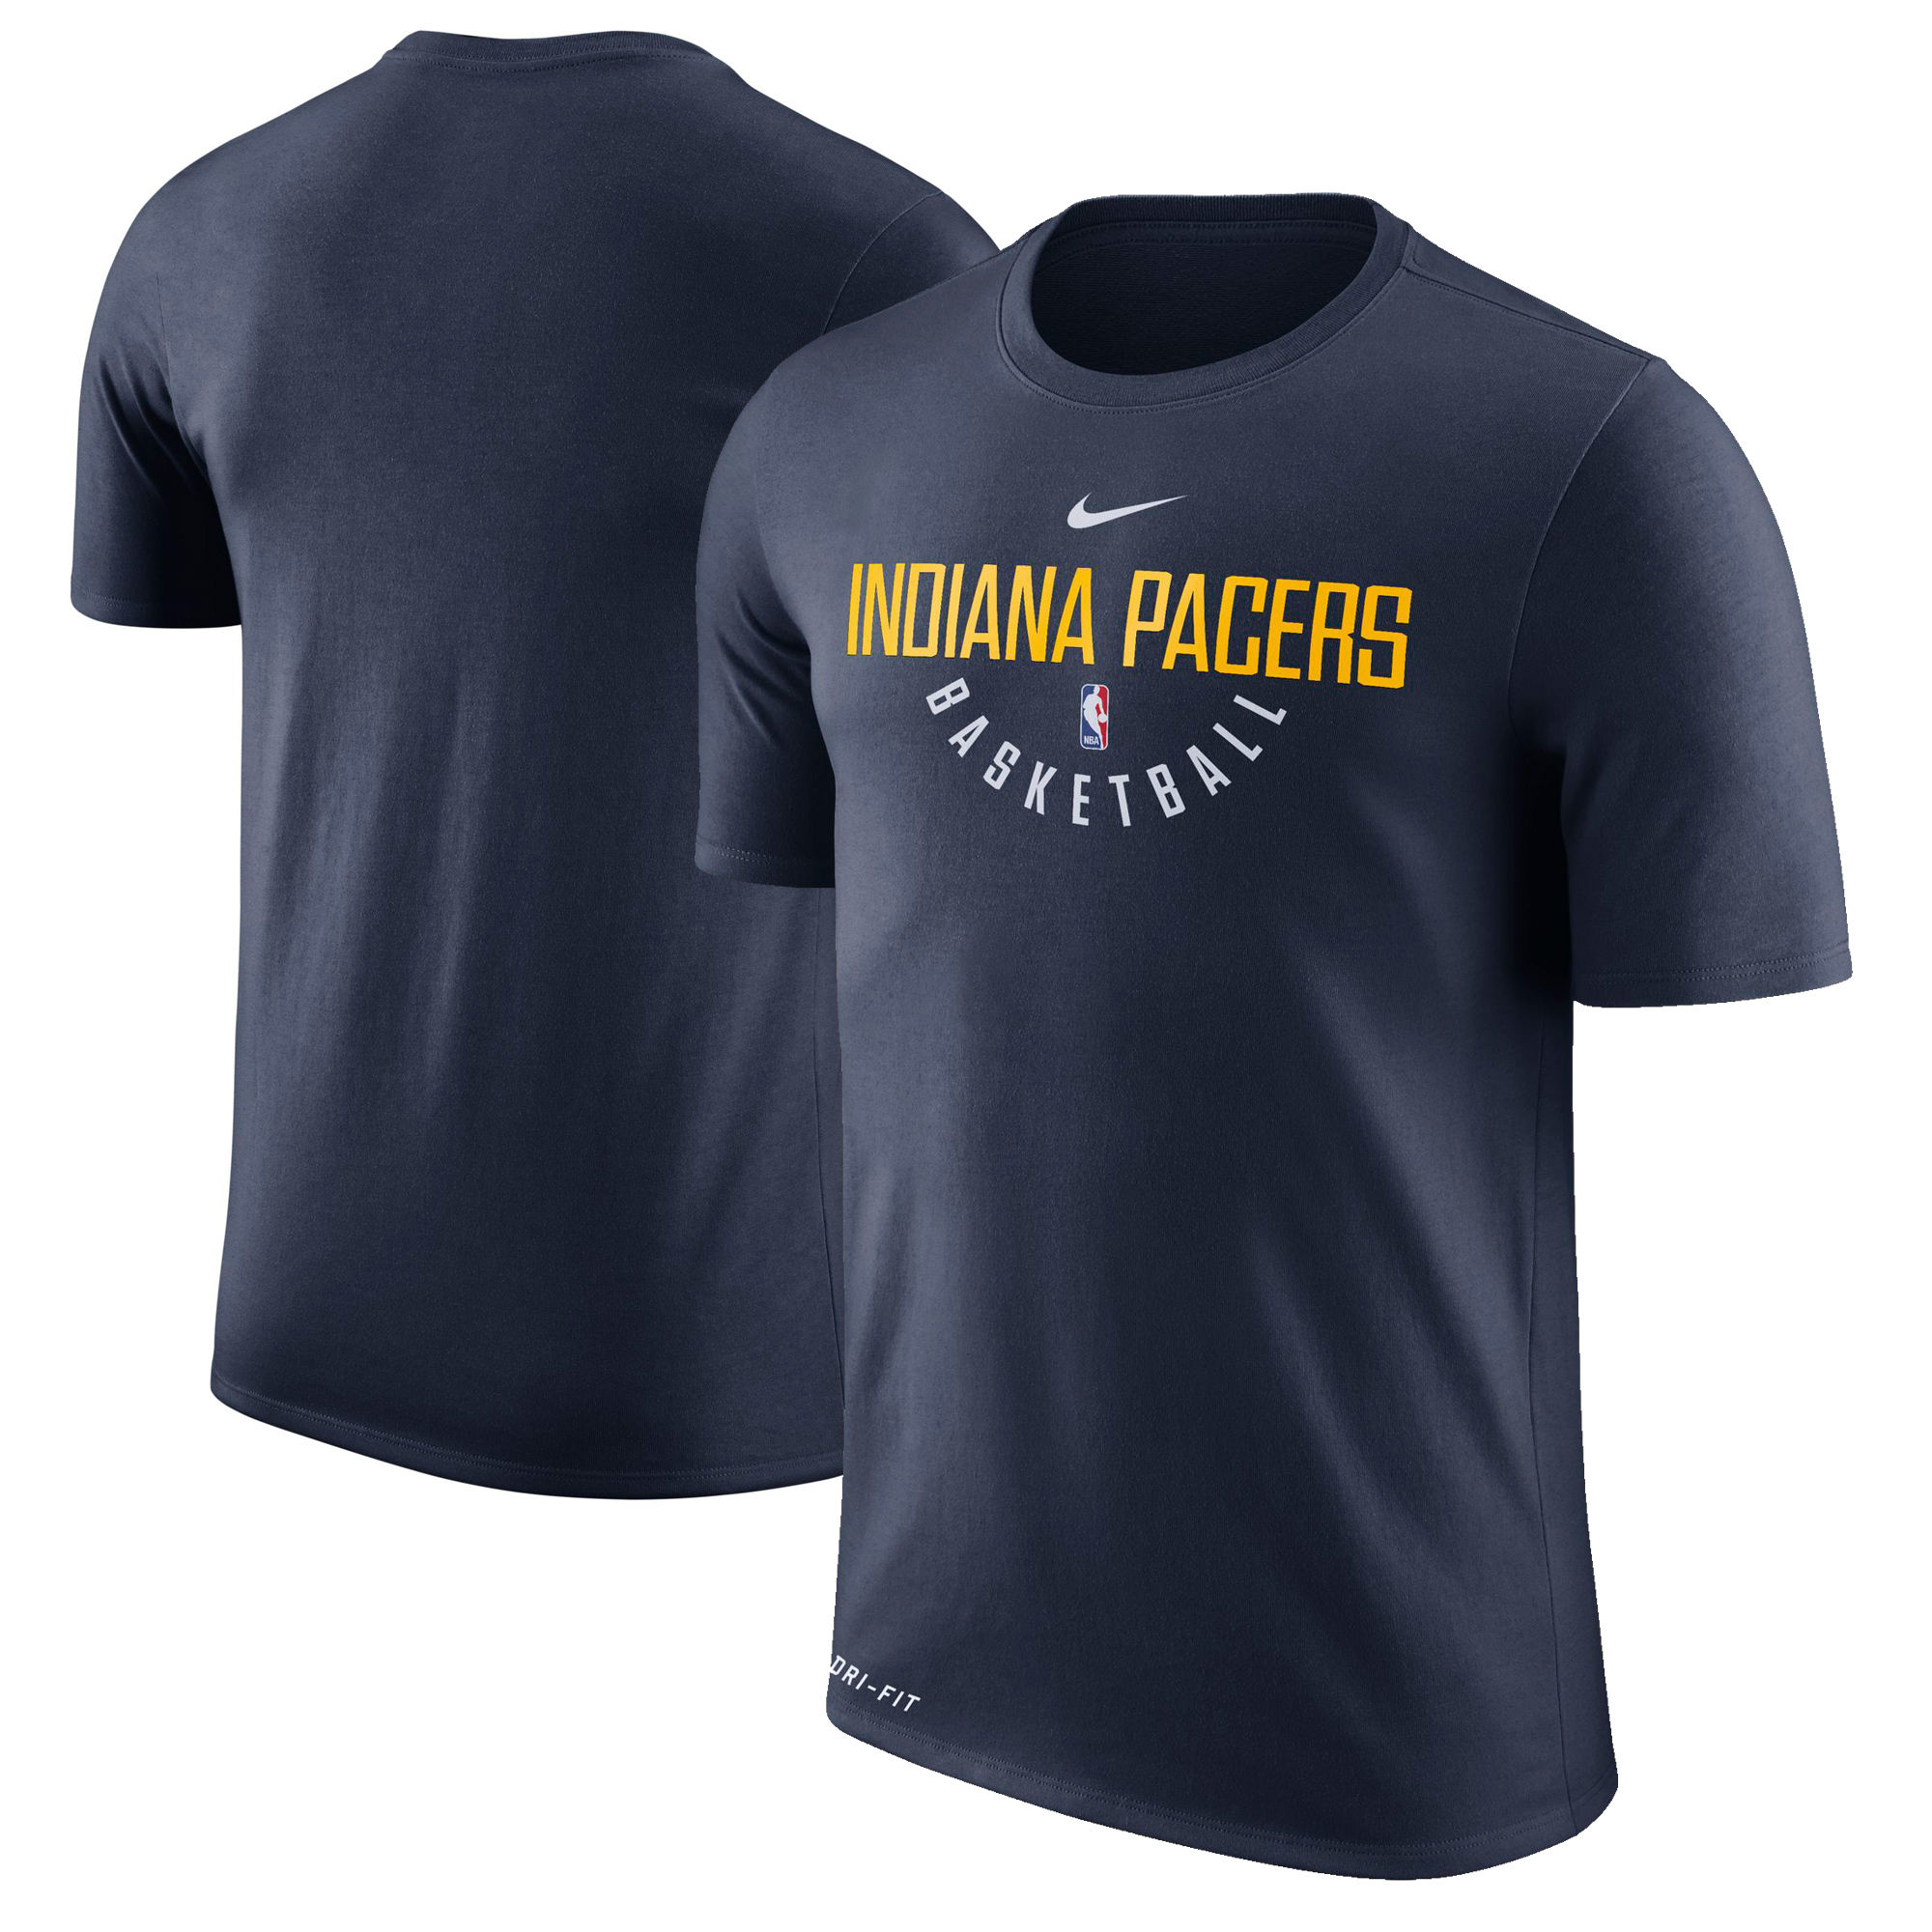 Indiana Pacers Navy Nike Practice Performance T-Shirt